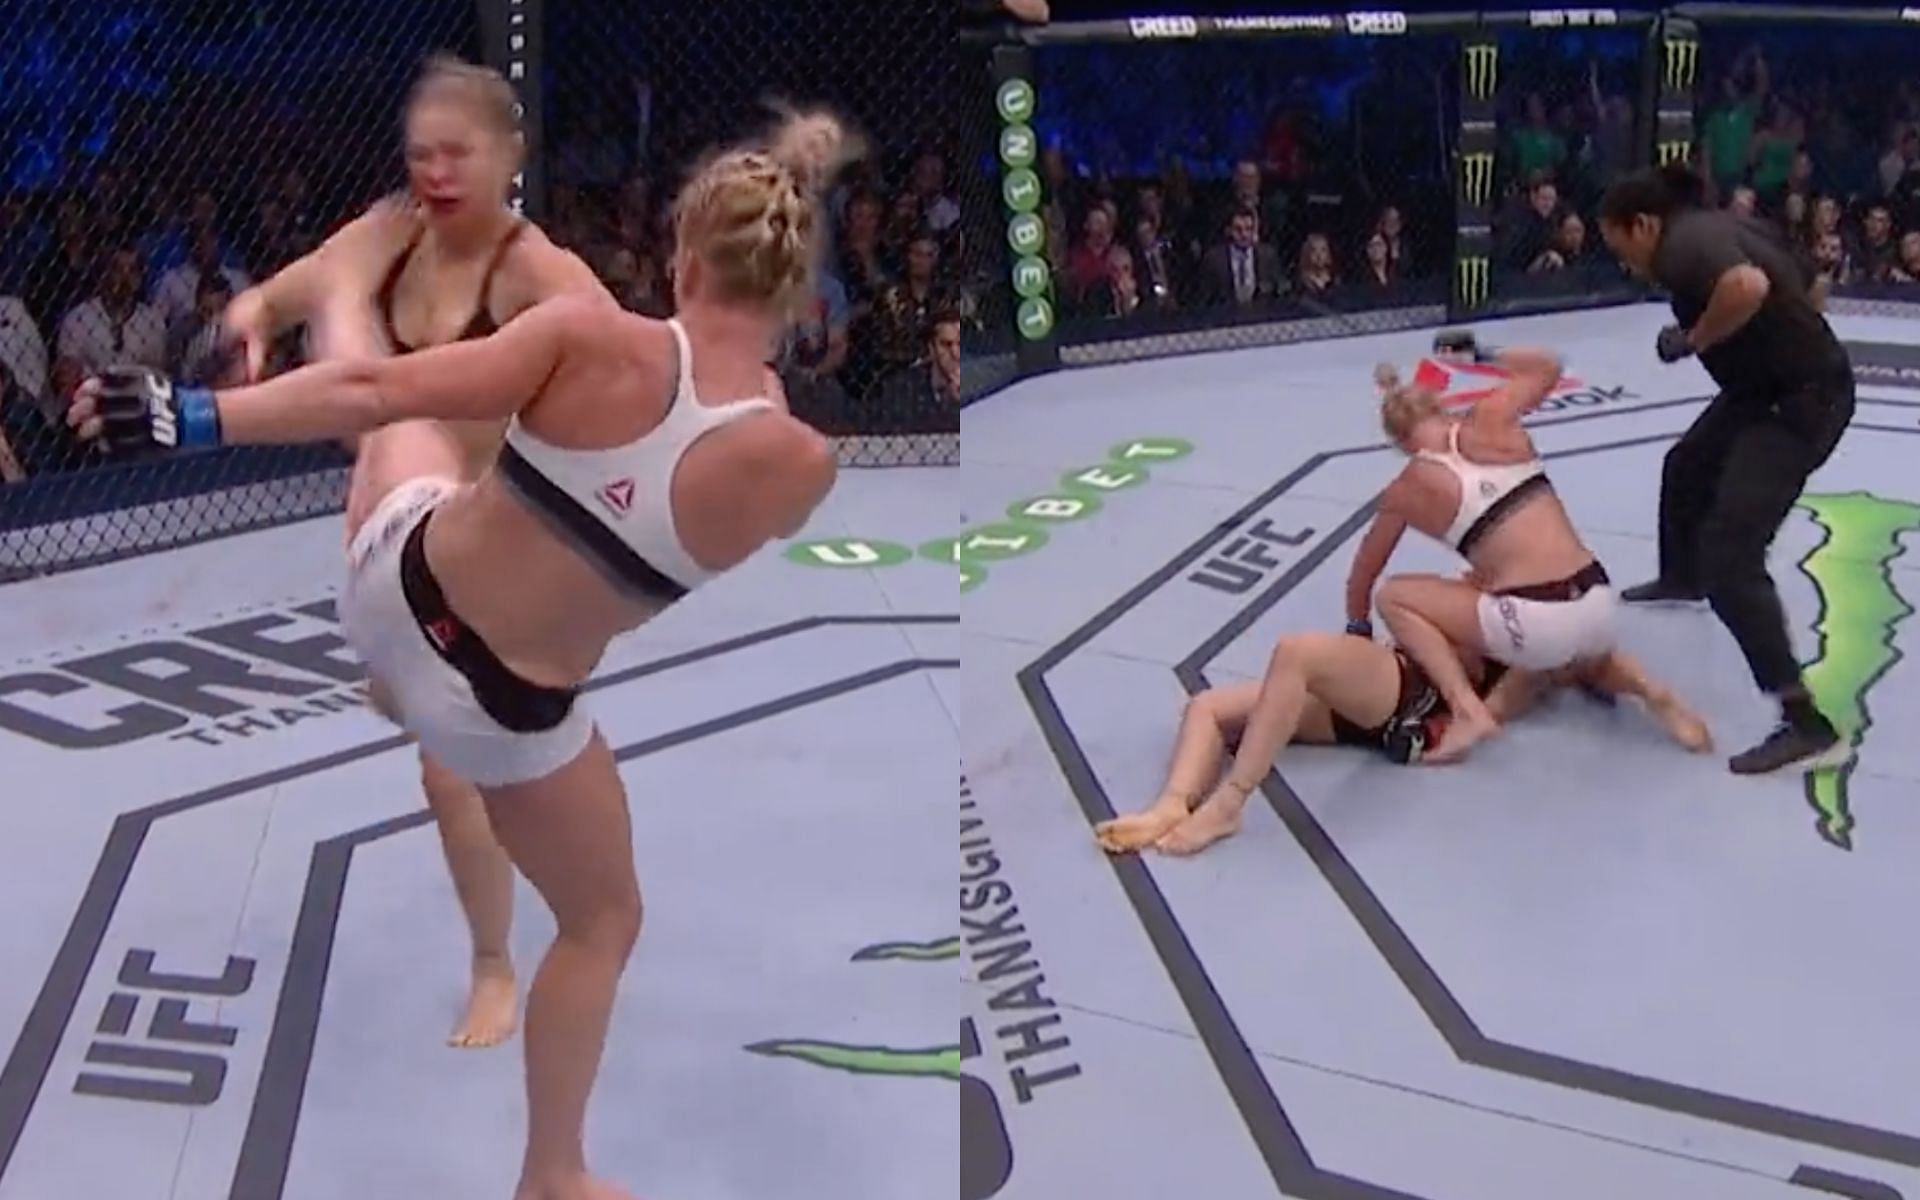 UFC 193 (Holly Holm vs. Ronda Rousey) [Image credits: @ufc on Twitter]